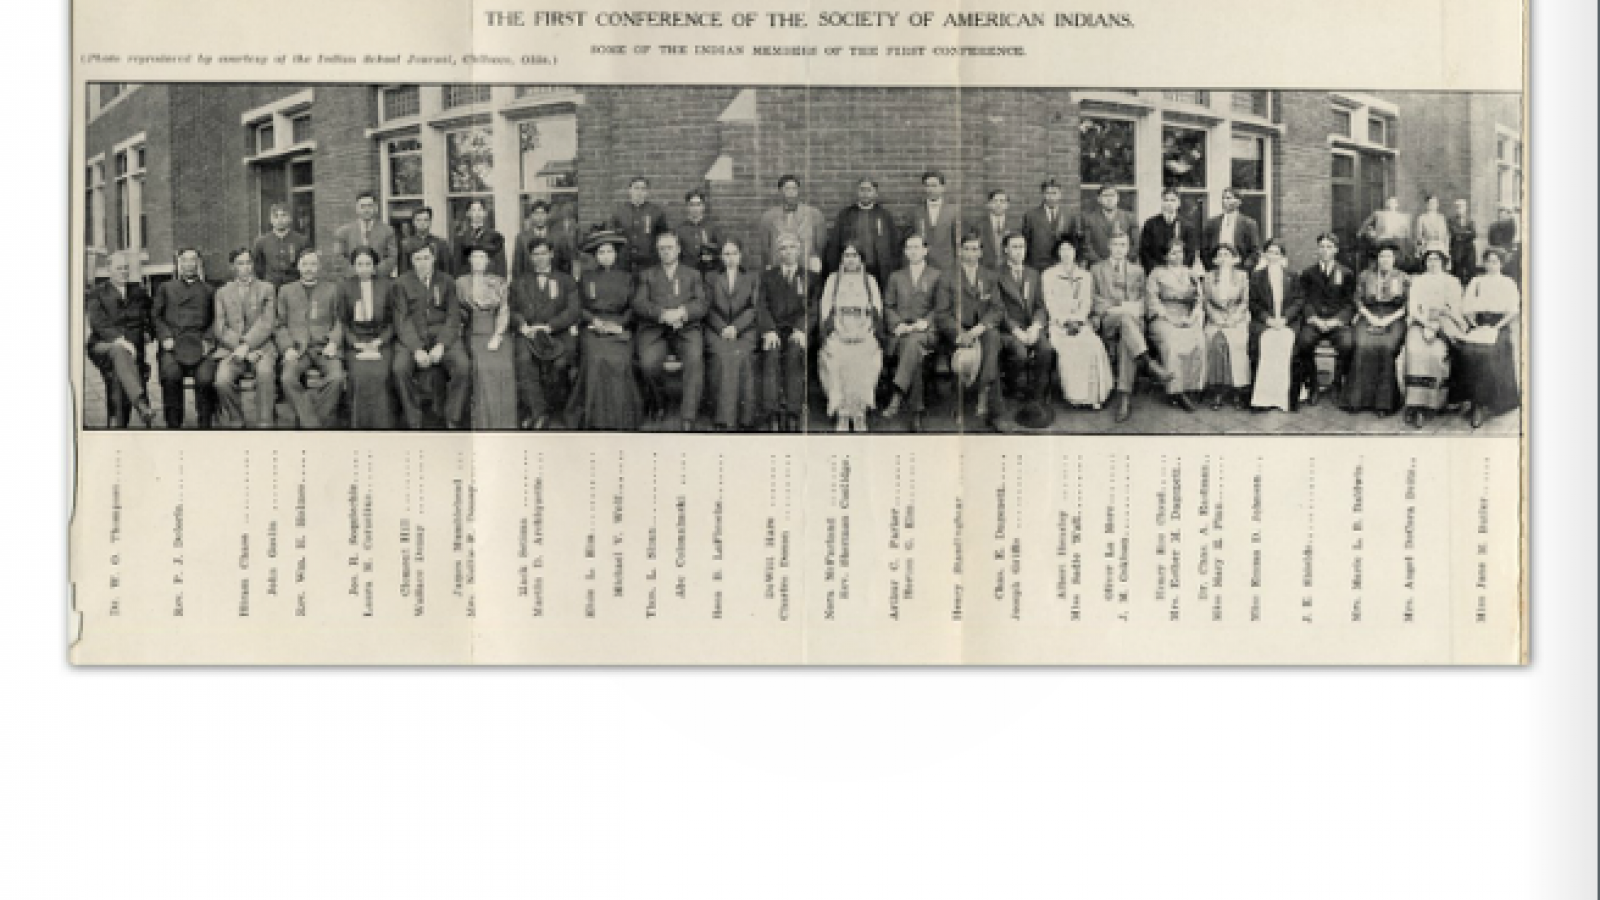 Society of American Indians Conference, Image 14